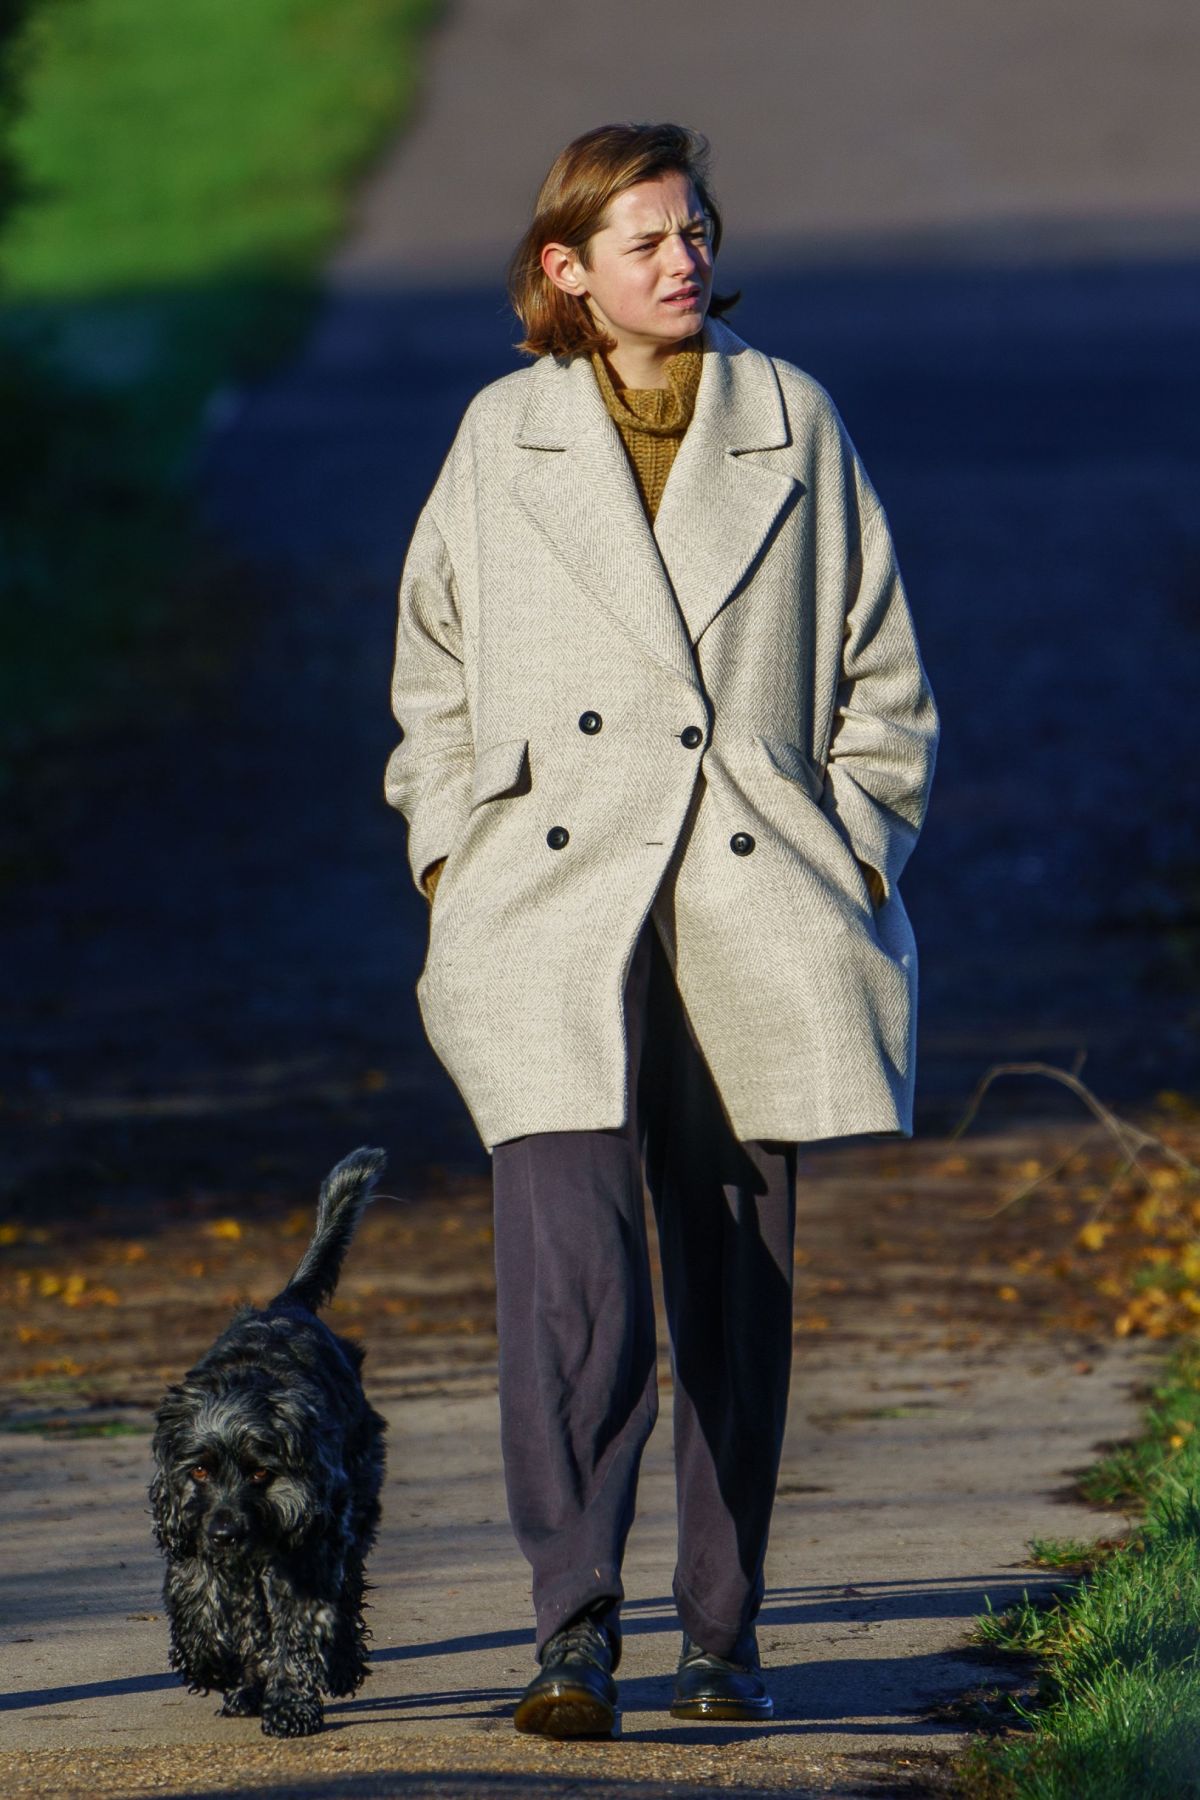 emma-corrin-out-with-her-dog-at-a-park-in-london-11-15-2020-9.jpg